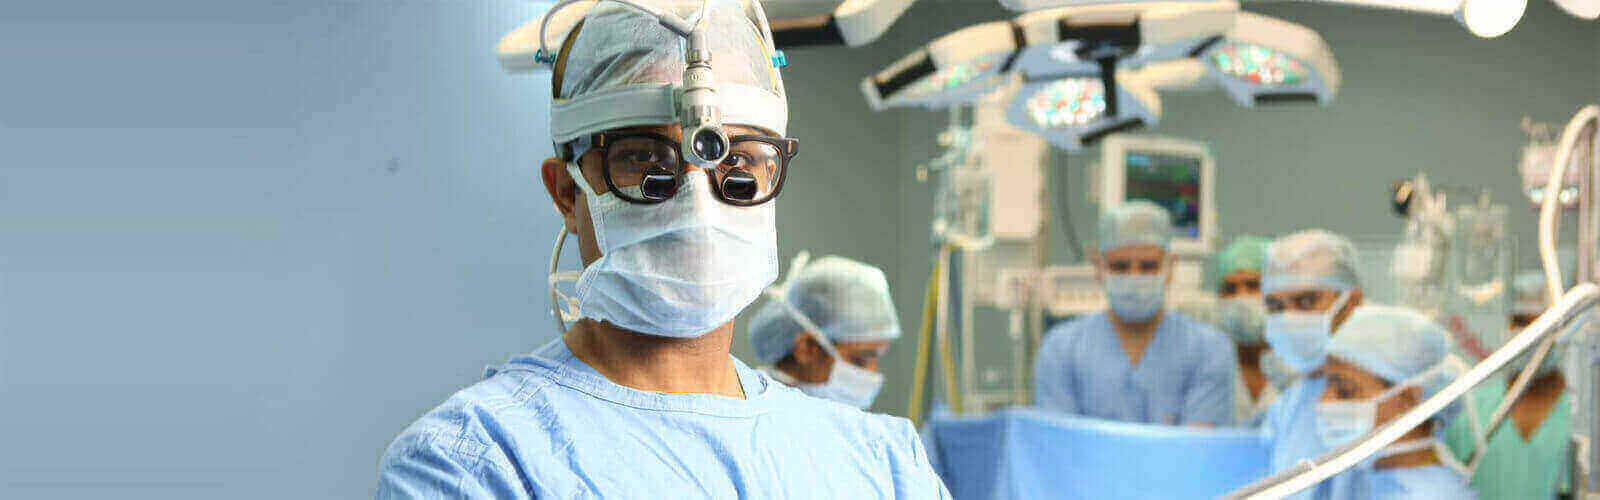 Heart Bypass Surgery in United States